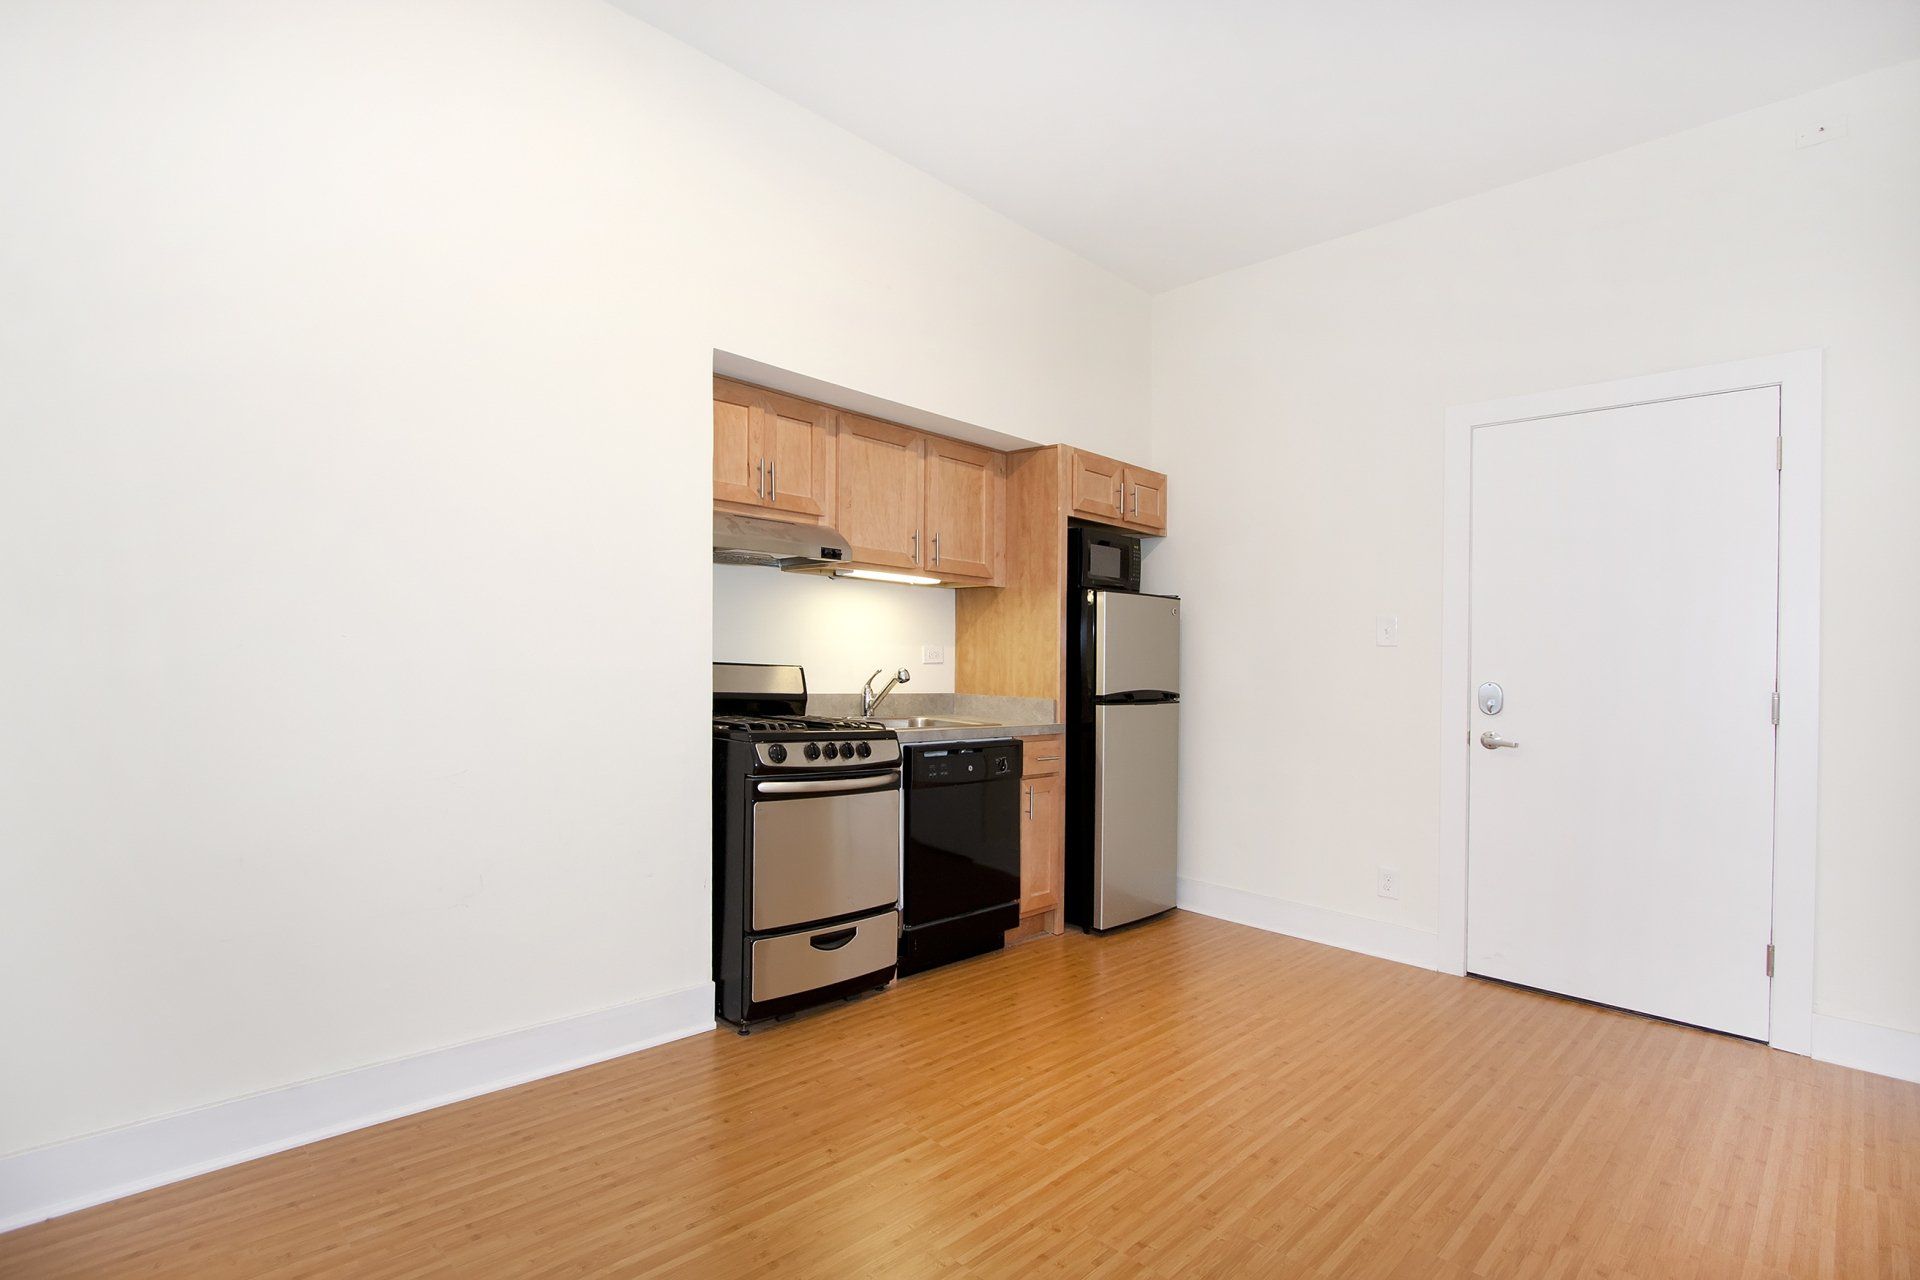 Kitchen and living room at Reside at 2525 in Chicago, IL.